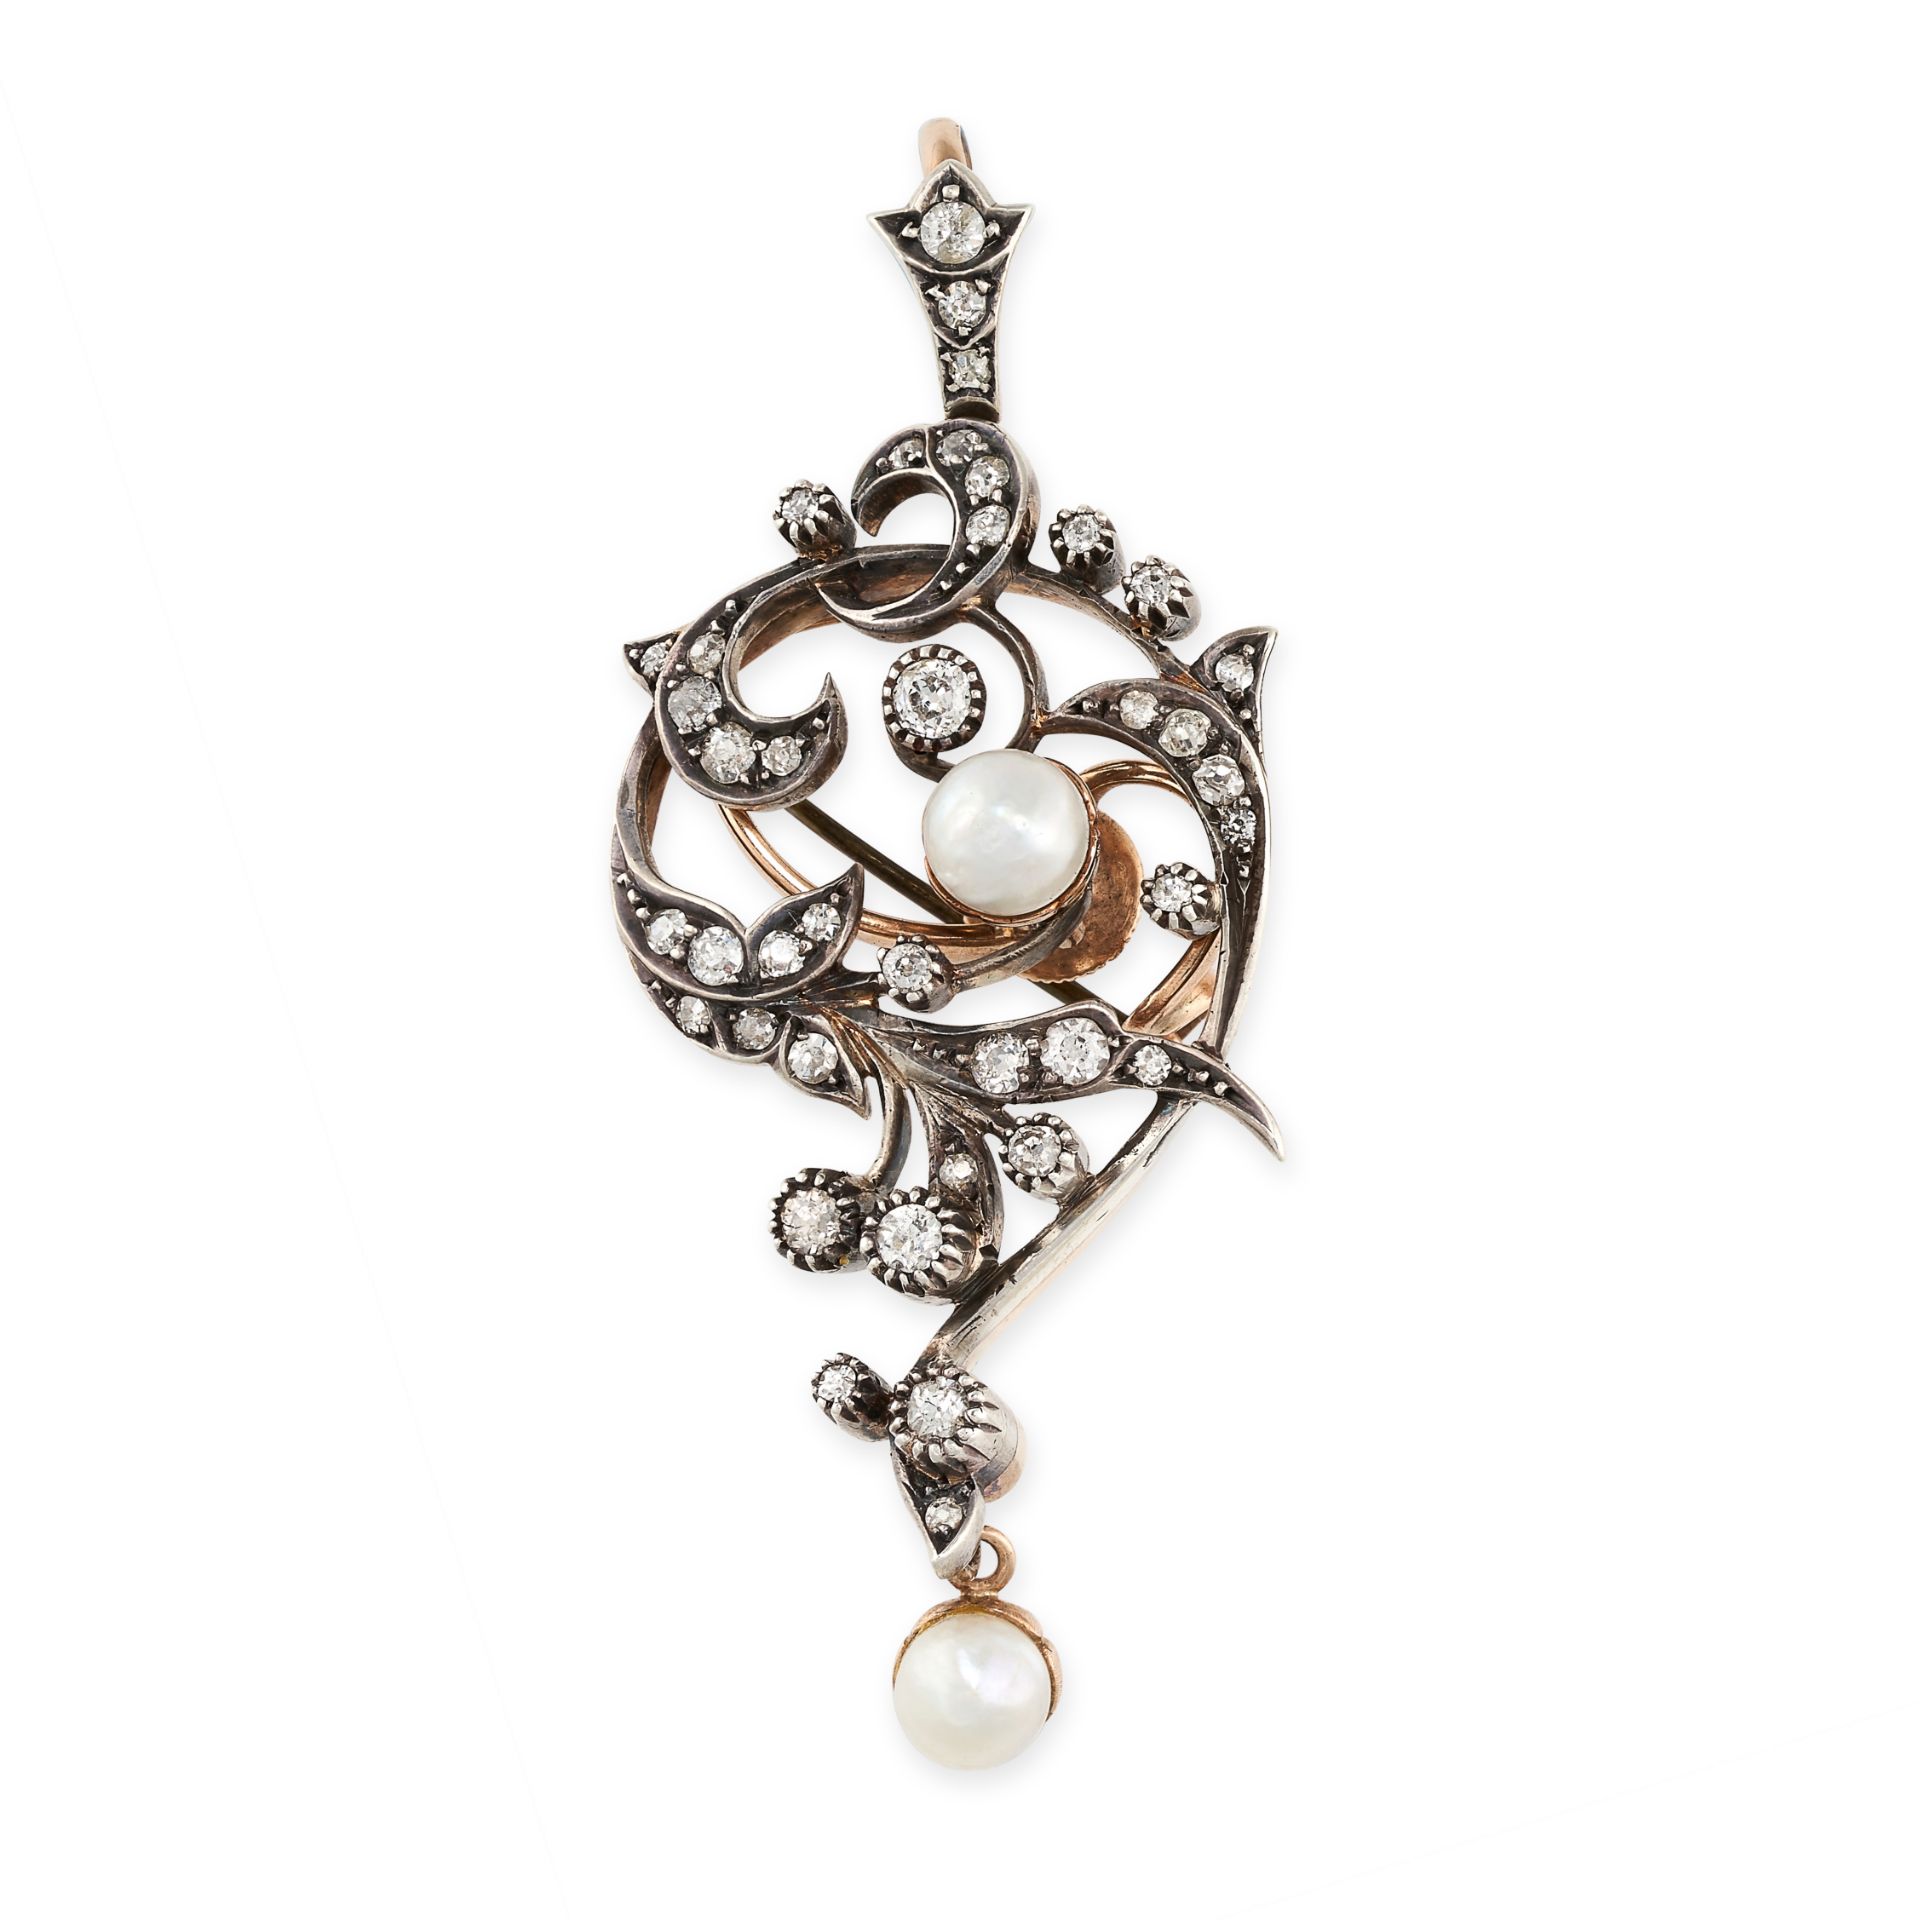 NO RESERVE - AN ANTIQUE PEARL AND DIAMOND PENDANT / BROOCH in yellow gold and silver, the